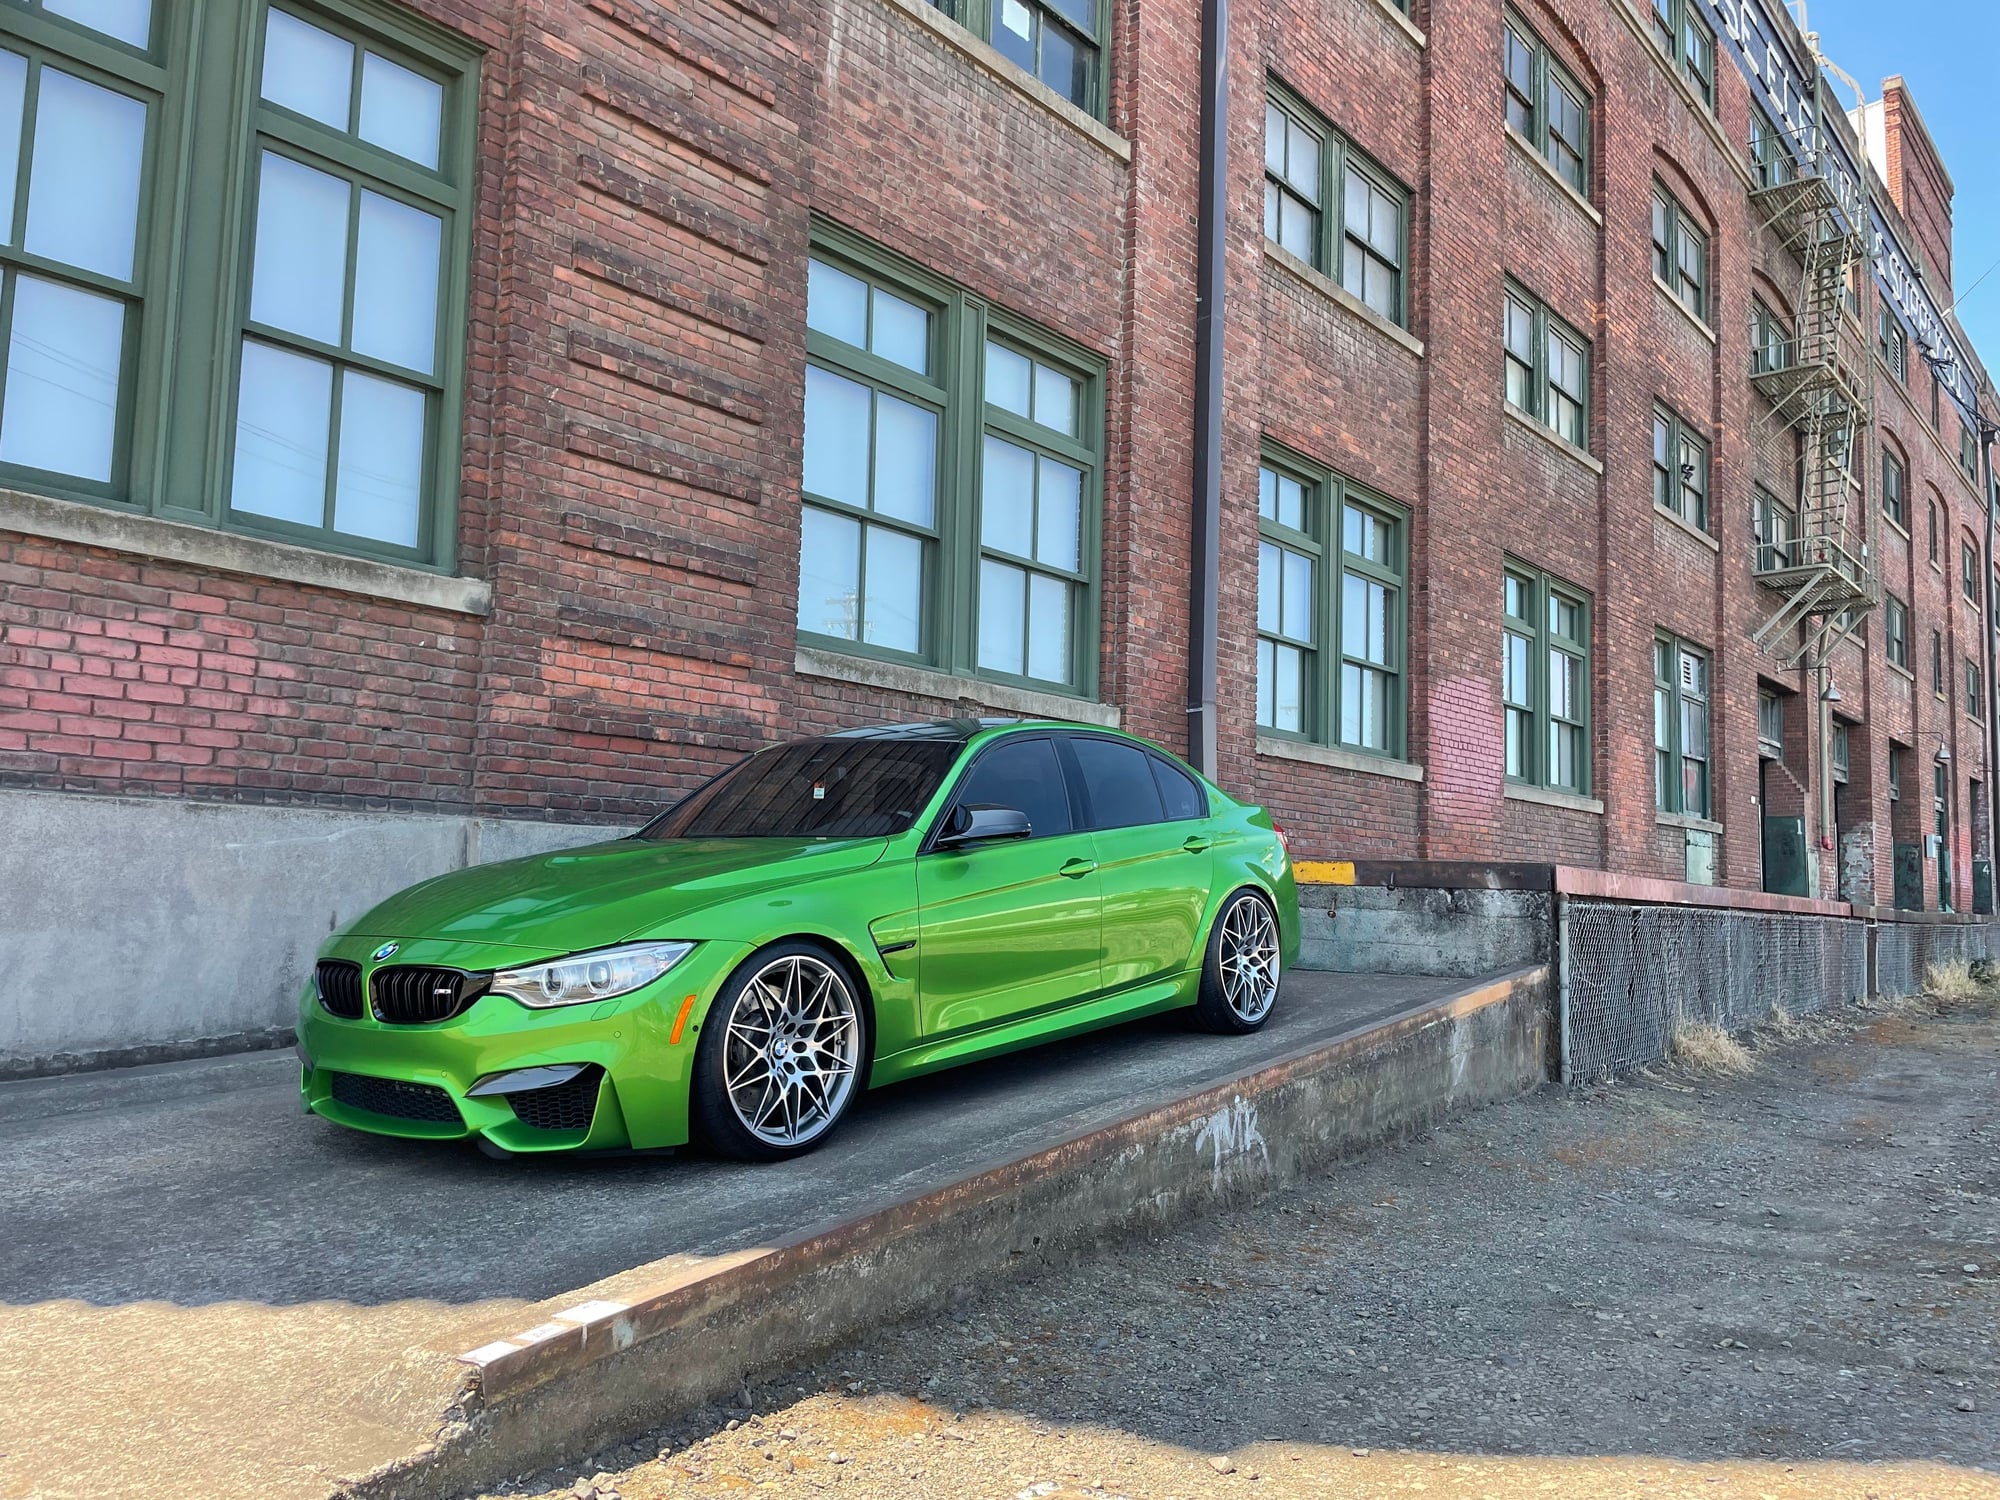 2016 BMW M3 - 2016 M3 DCT 37k Java Green Metallic - Used - VIN WBS8M9C56G5D30589 - 37,106 Miles - 6 cyl - 2WD - Automatic - Other - Portland, OR 97205, United States